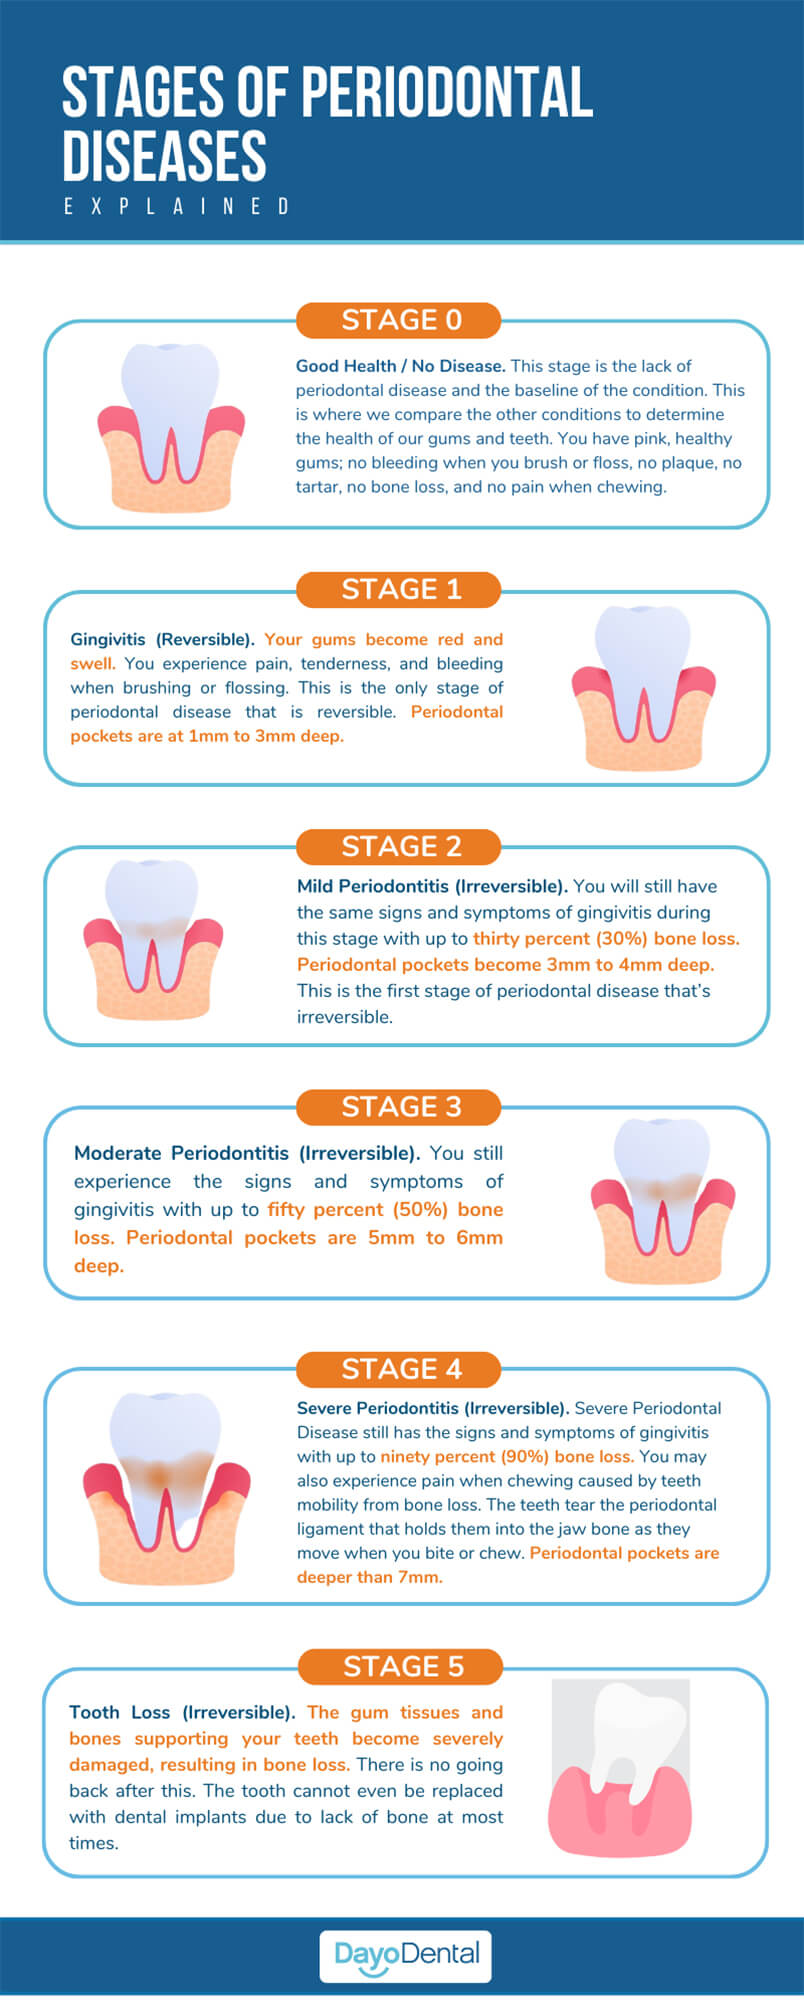 Stages of Periodontal Diseases explained Dayo Dental